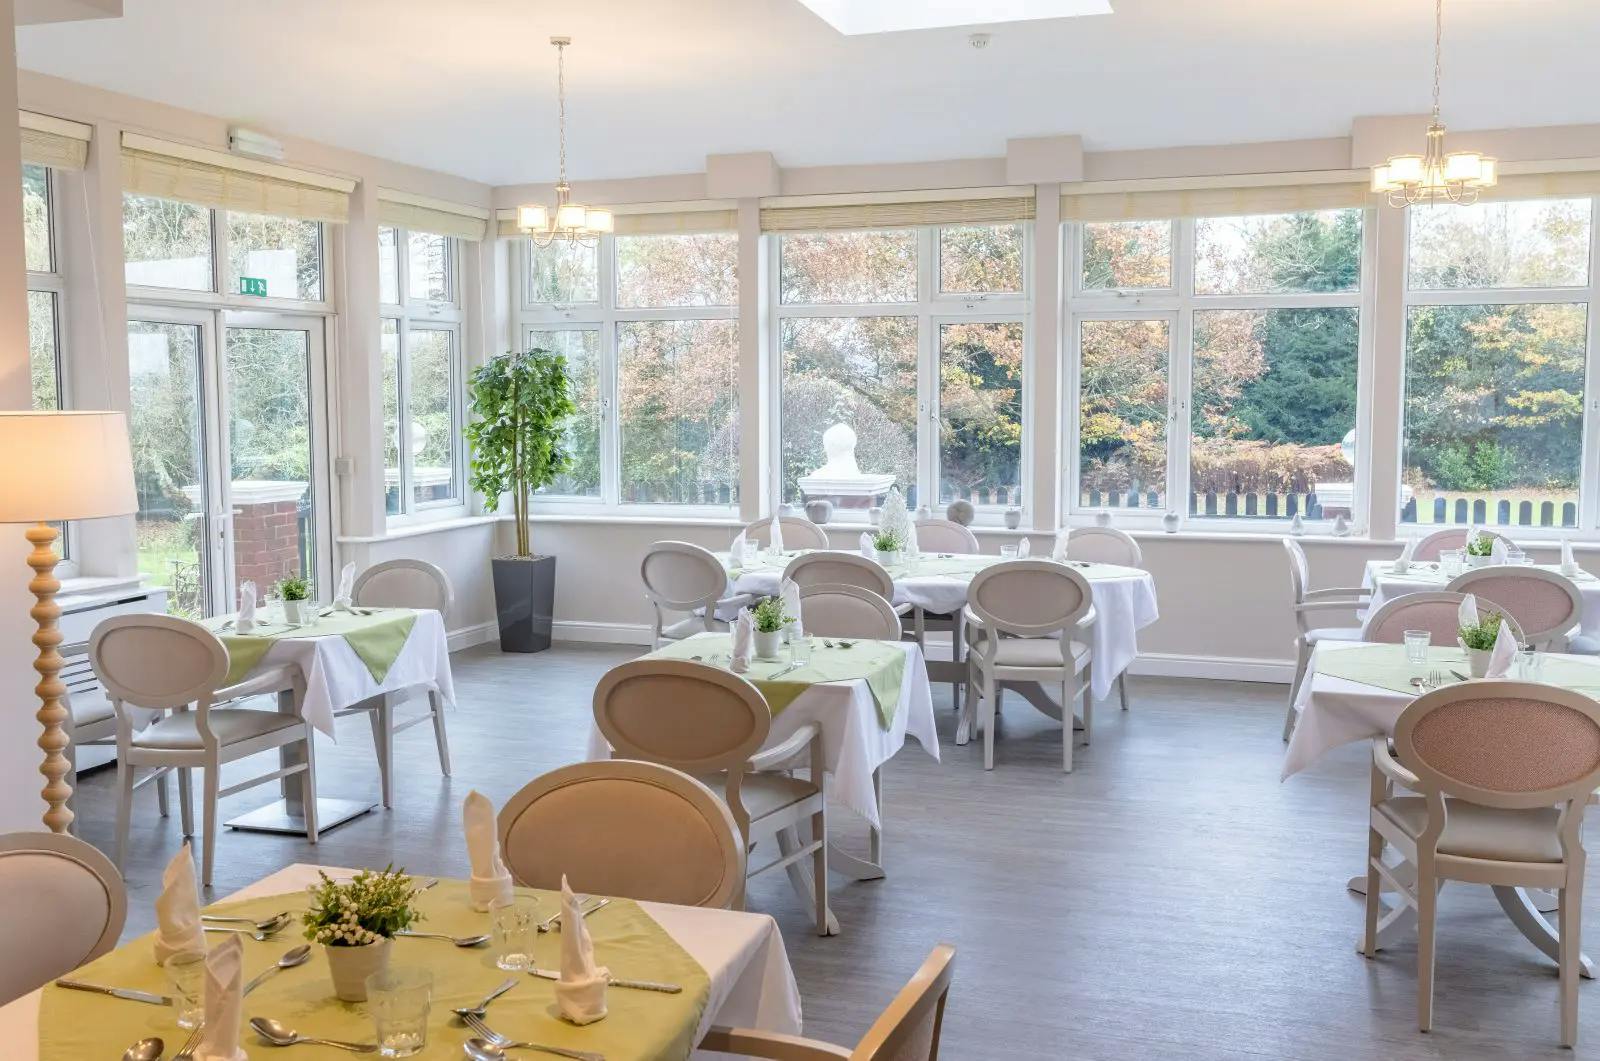 Dining Room at Coppice Lea Care Home in Redhill, Surrey 